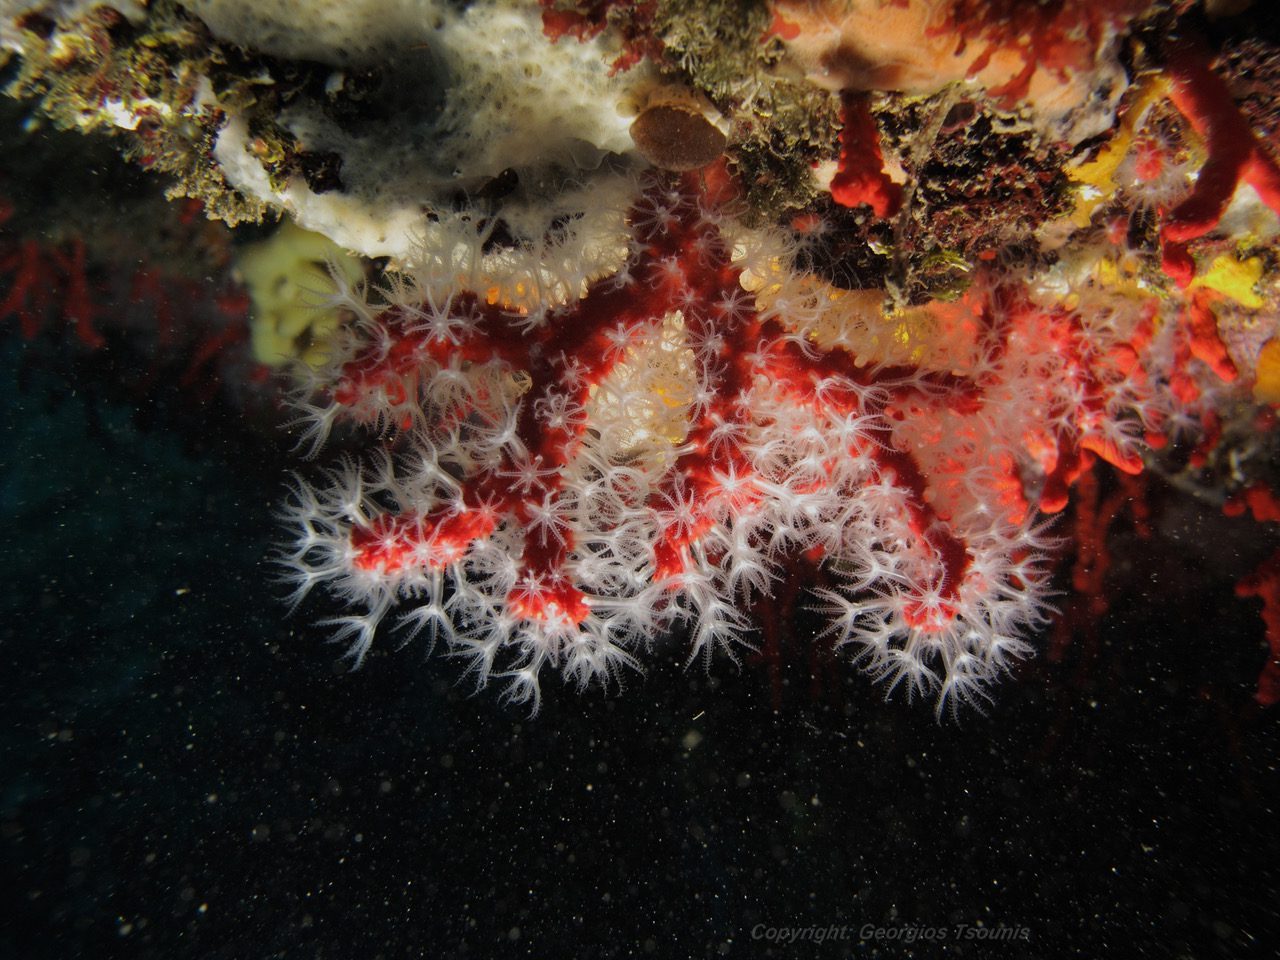 Red coral sits attached to undersea rock against a black background